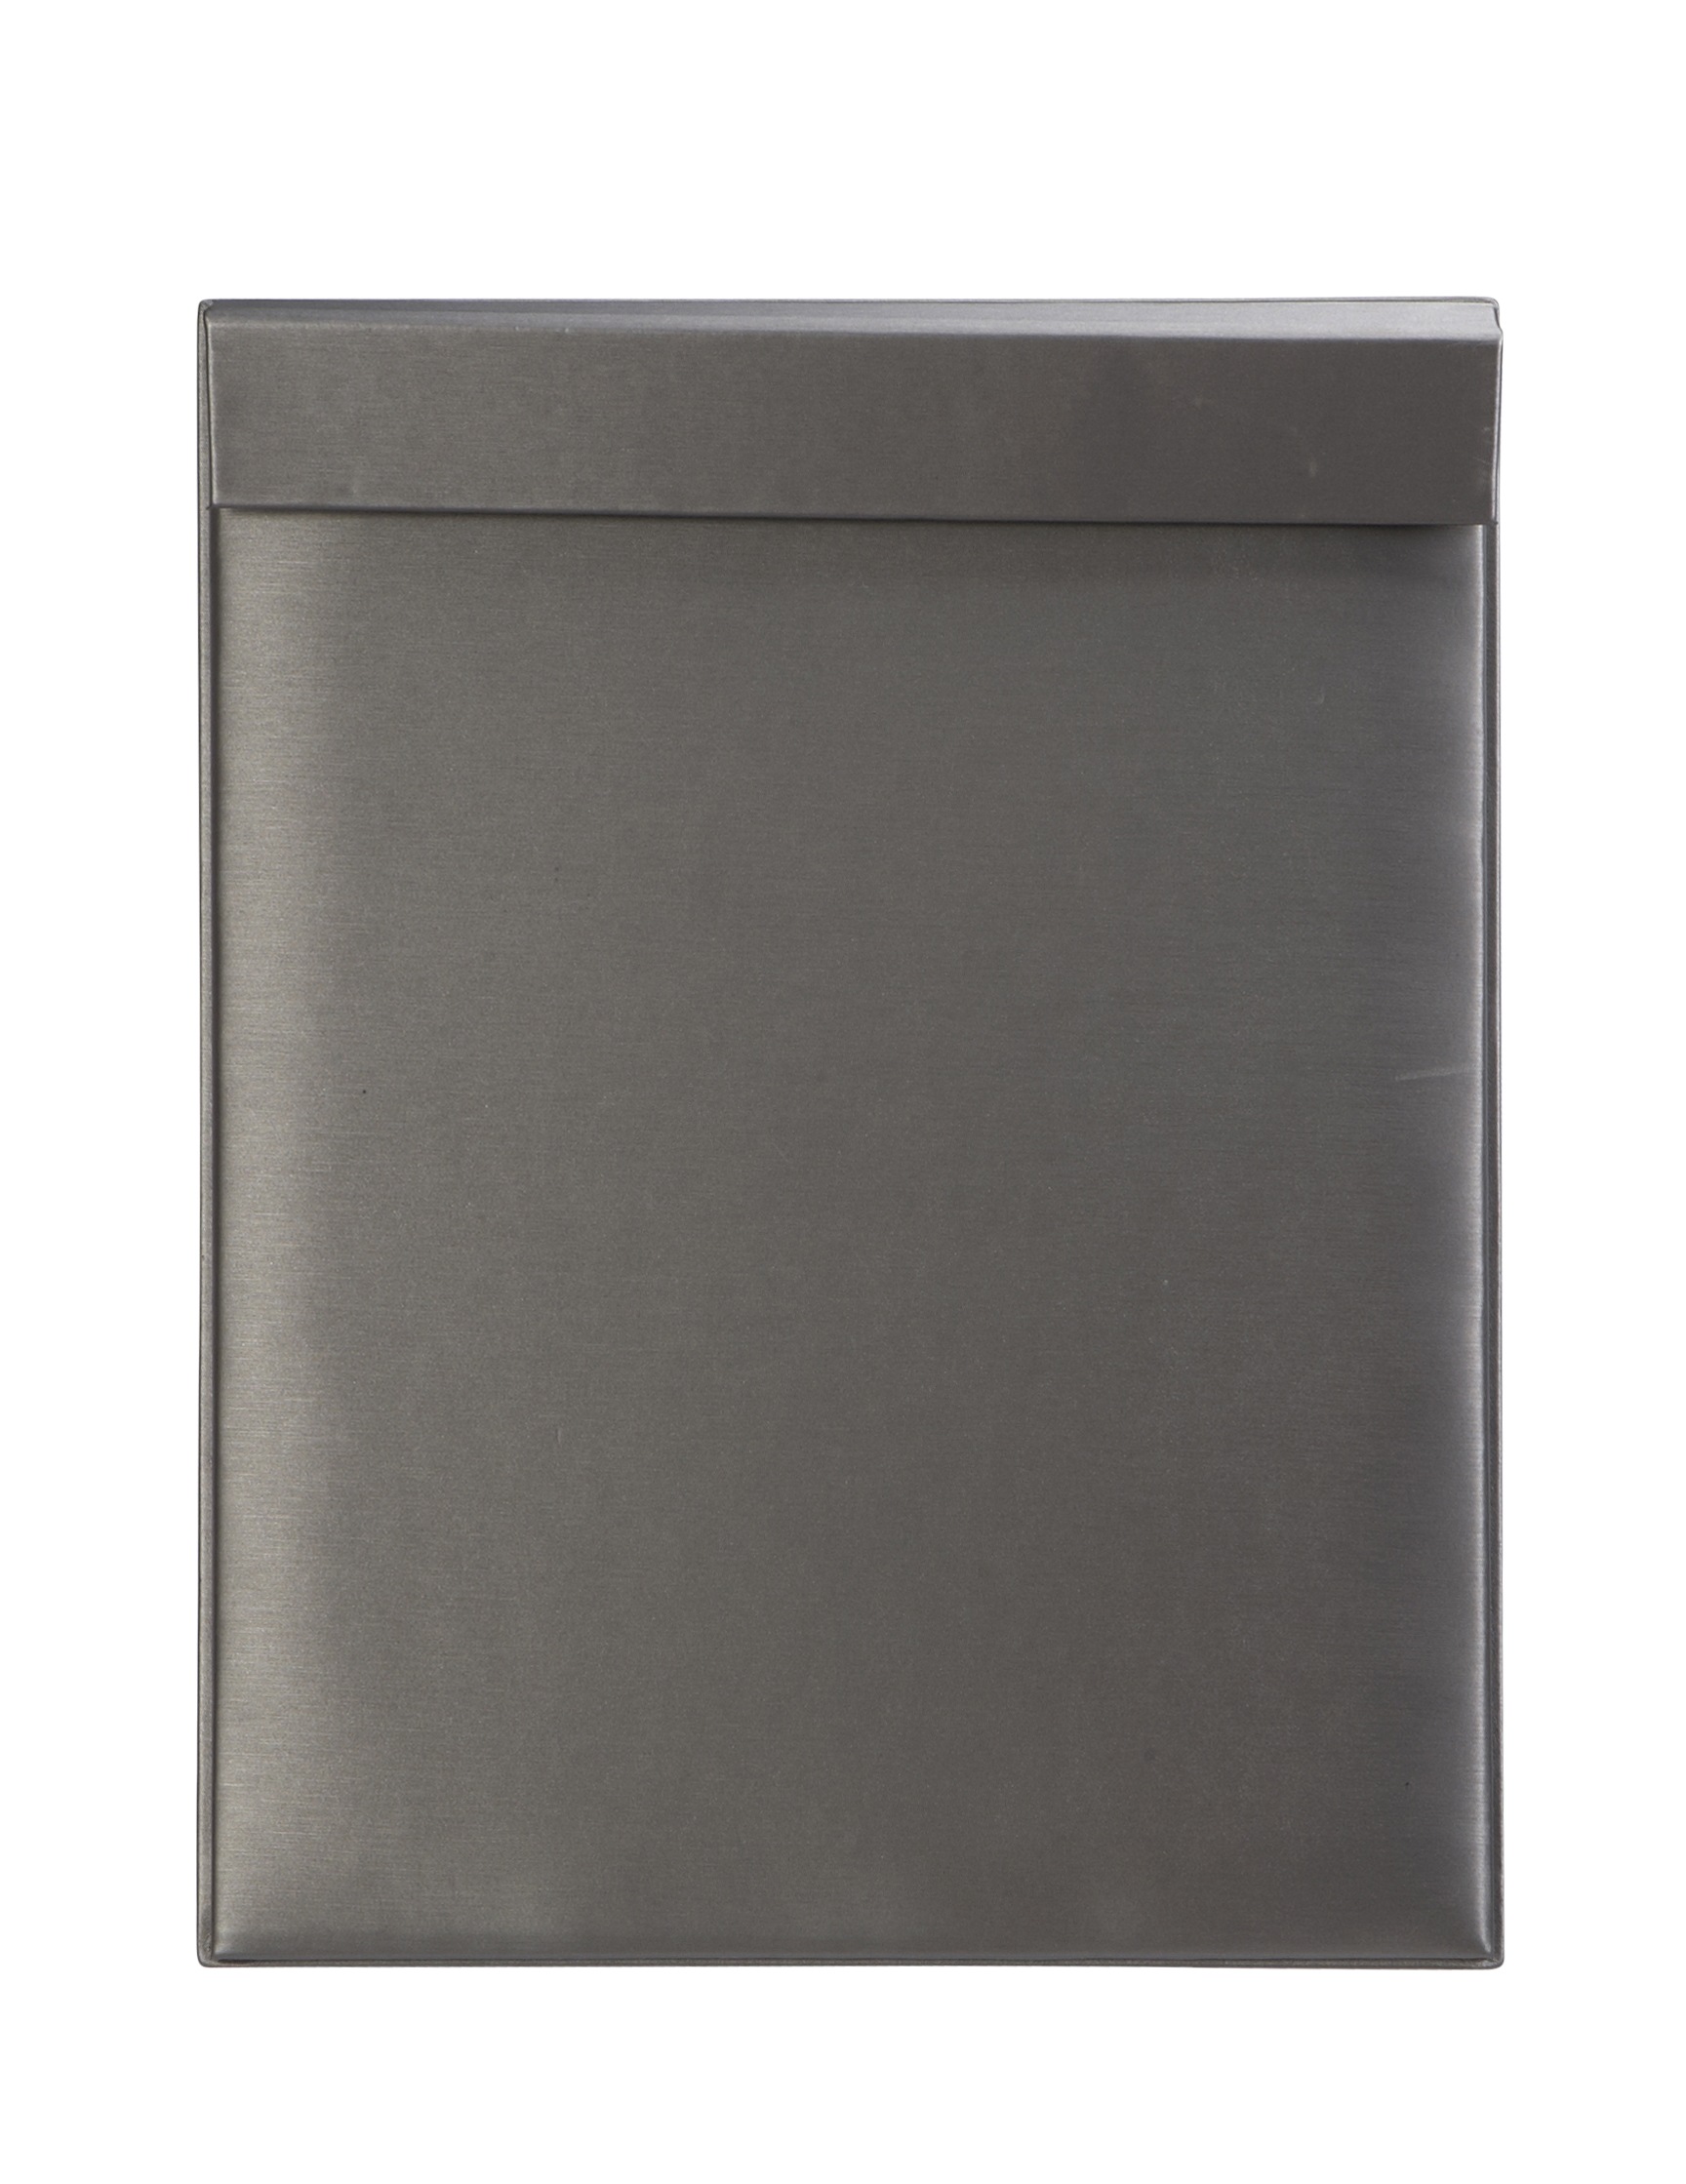 Silver Gray Leatherette 14 Chain Counter Pad